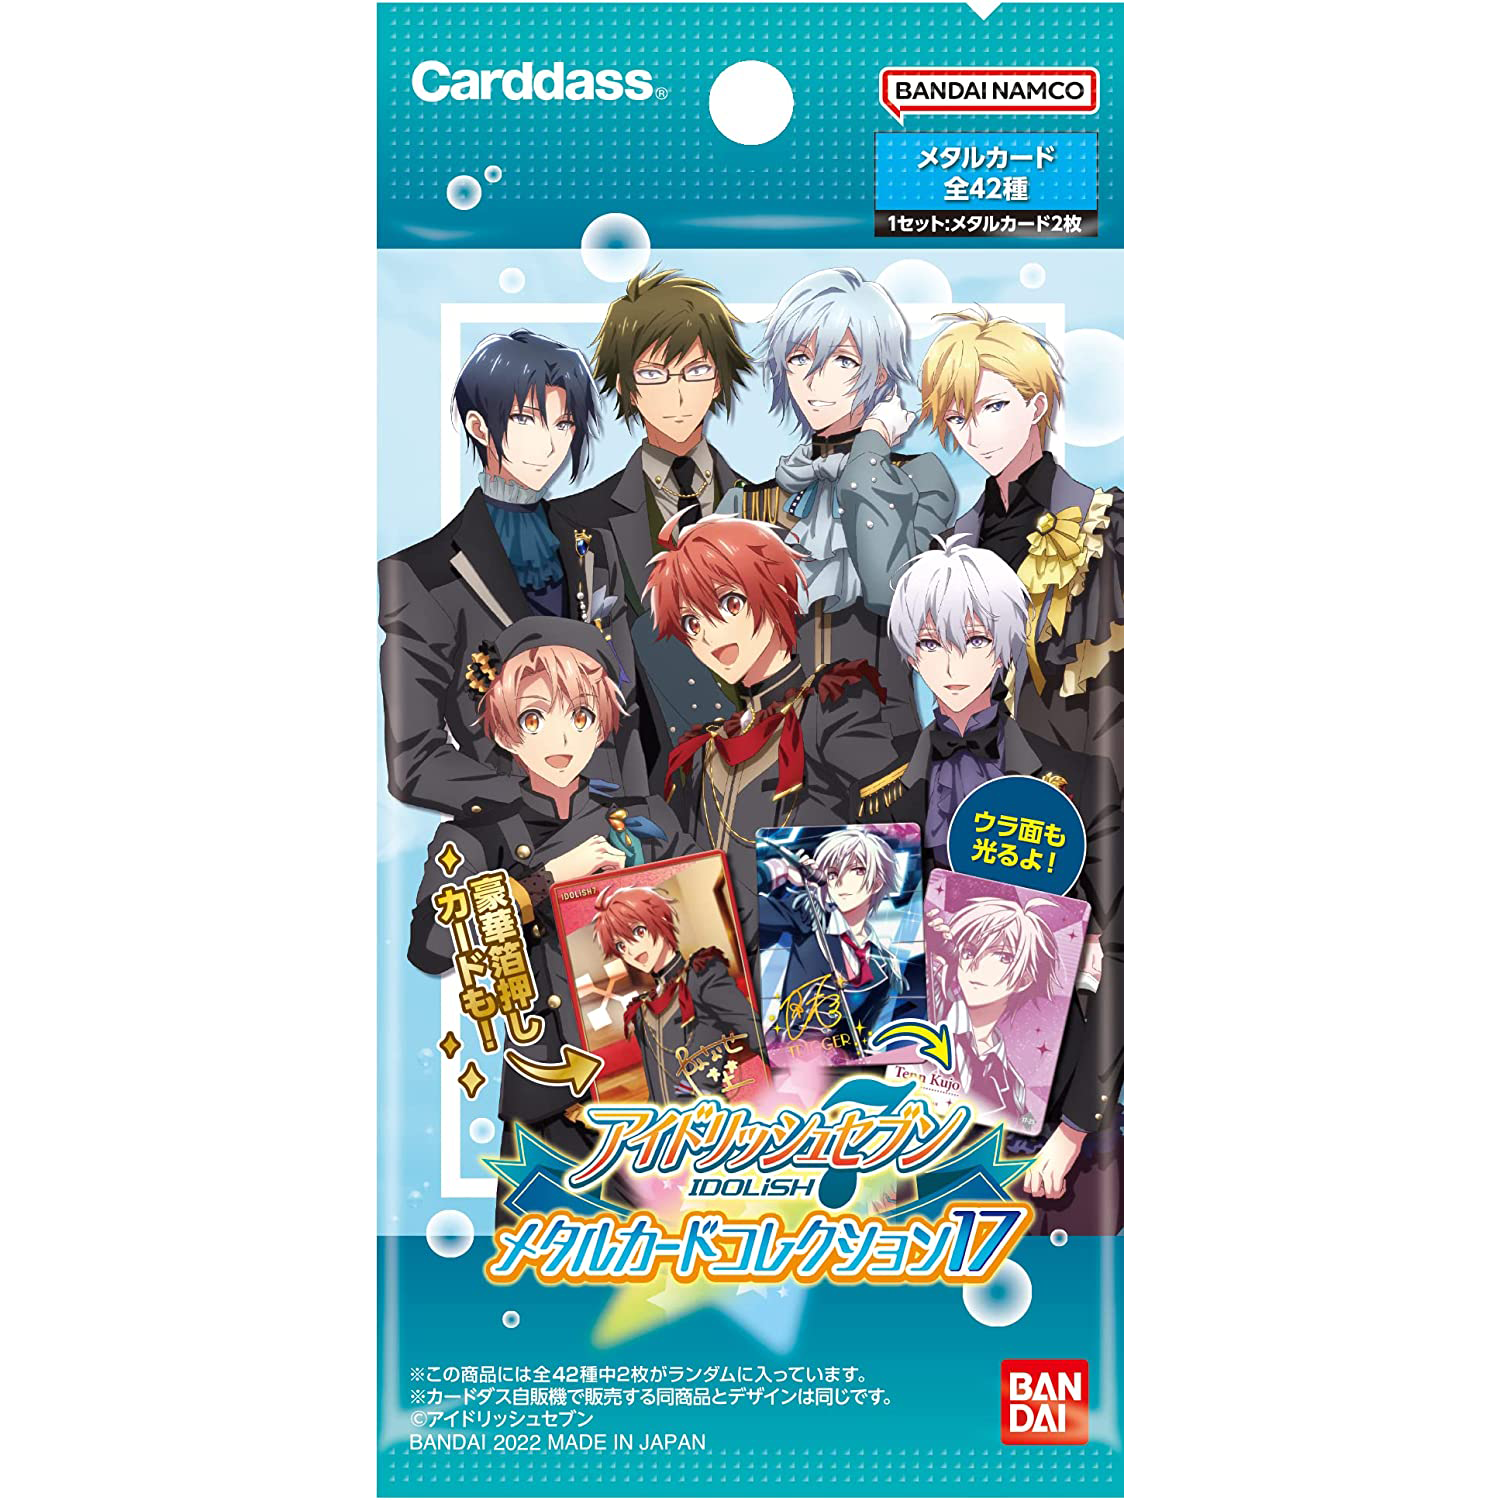 IDOLiSH SEVEN METAL CARD COLLECTION 17 Pack Ver. - Box